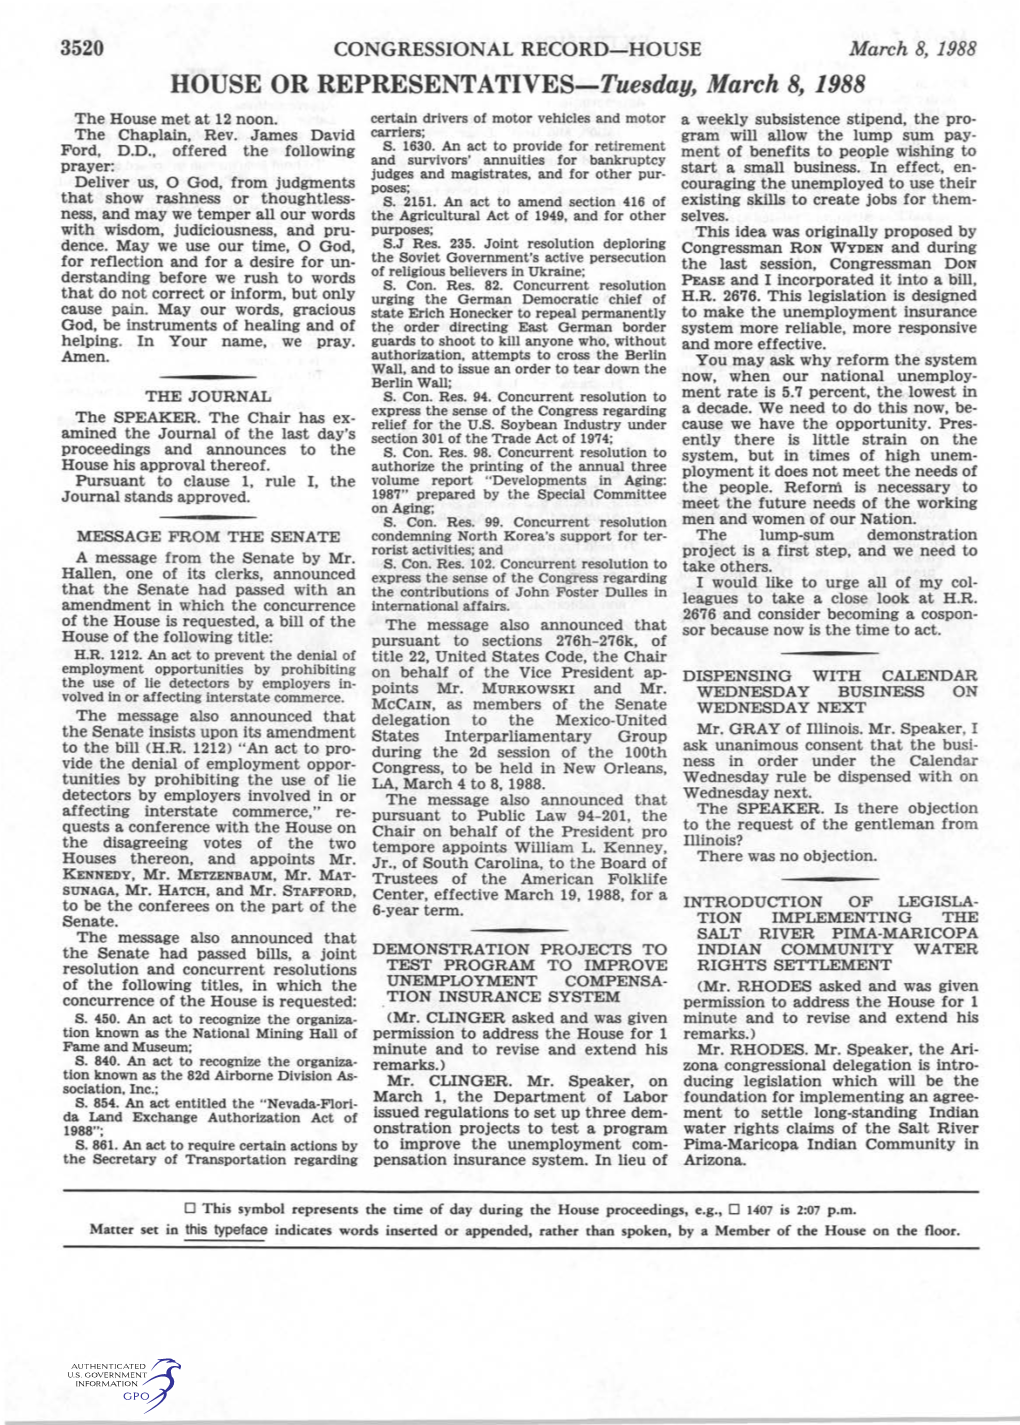 HOUSE OR REPRESENTATIVES-Tuesday, March 8, 1988 the House Met at 12 Noon